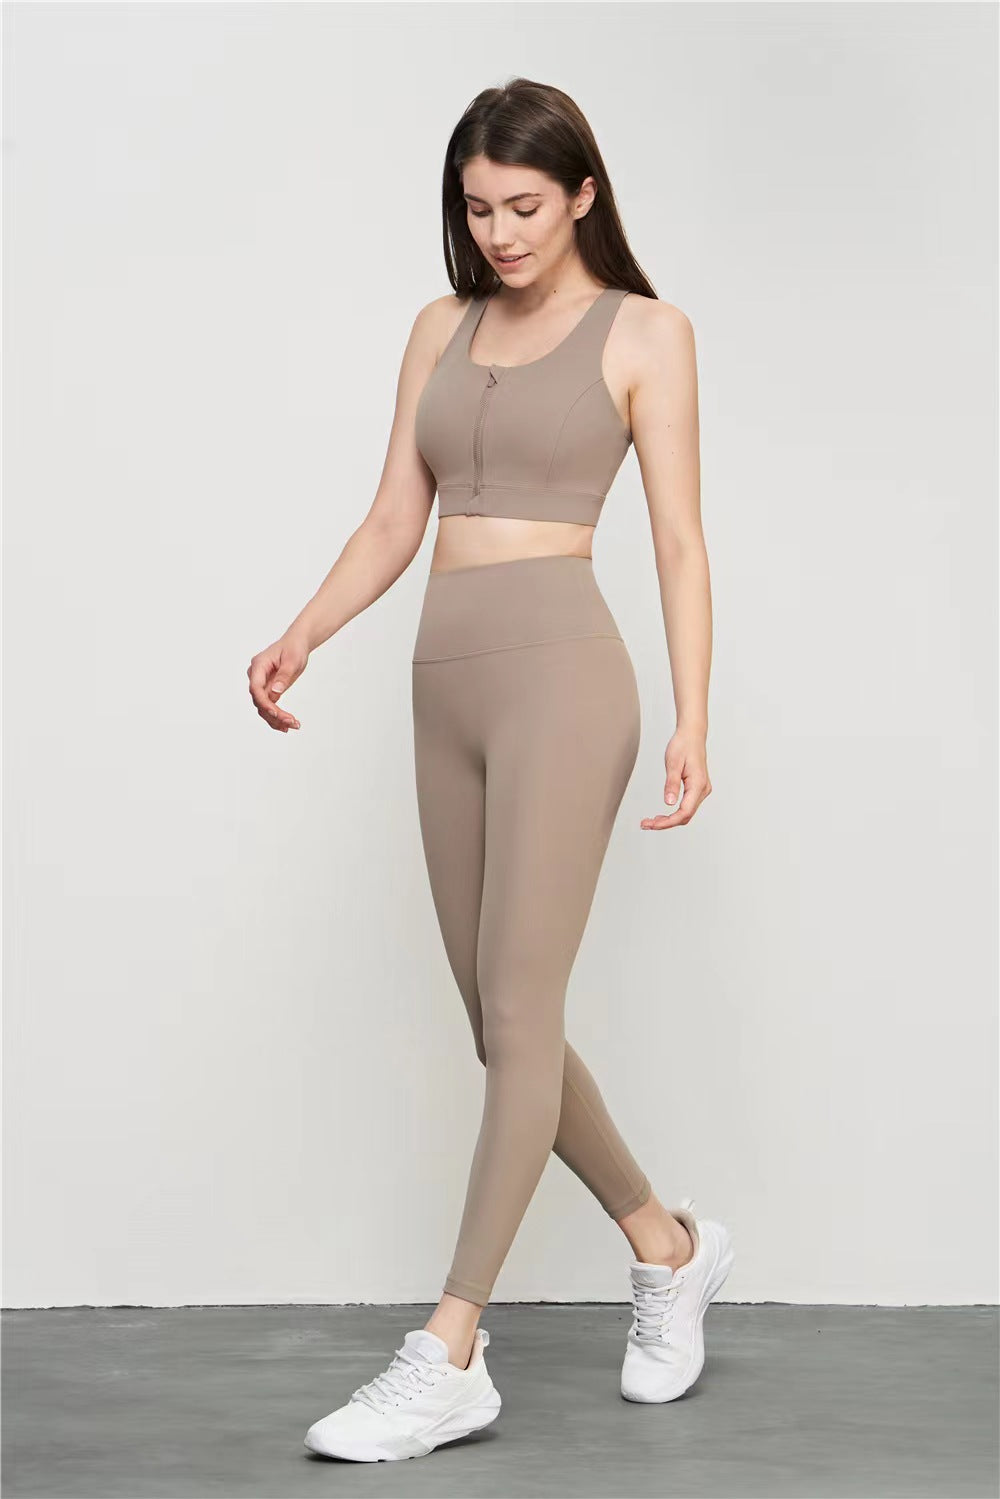 Stylish yoga outfit for women